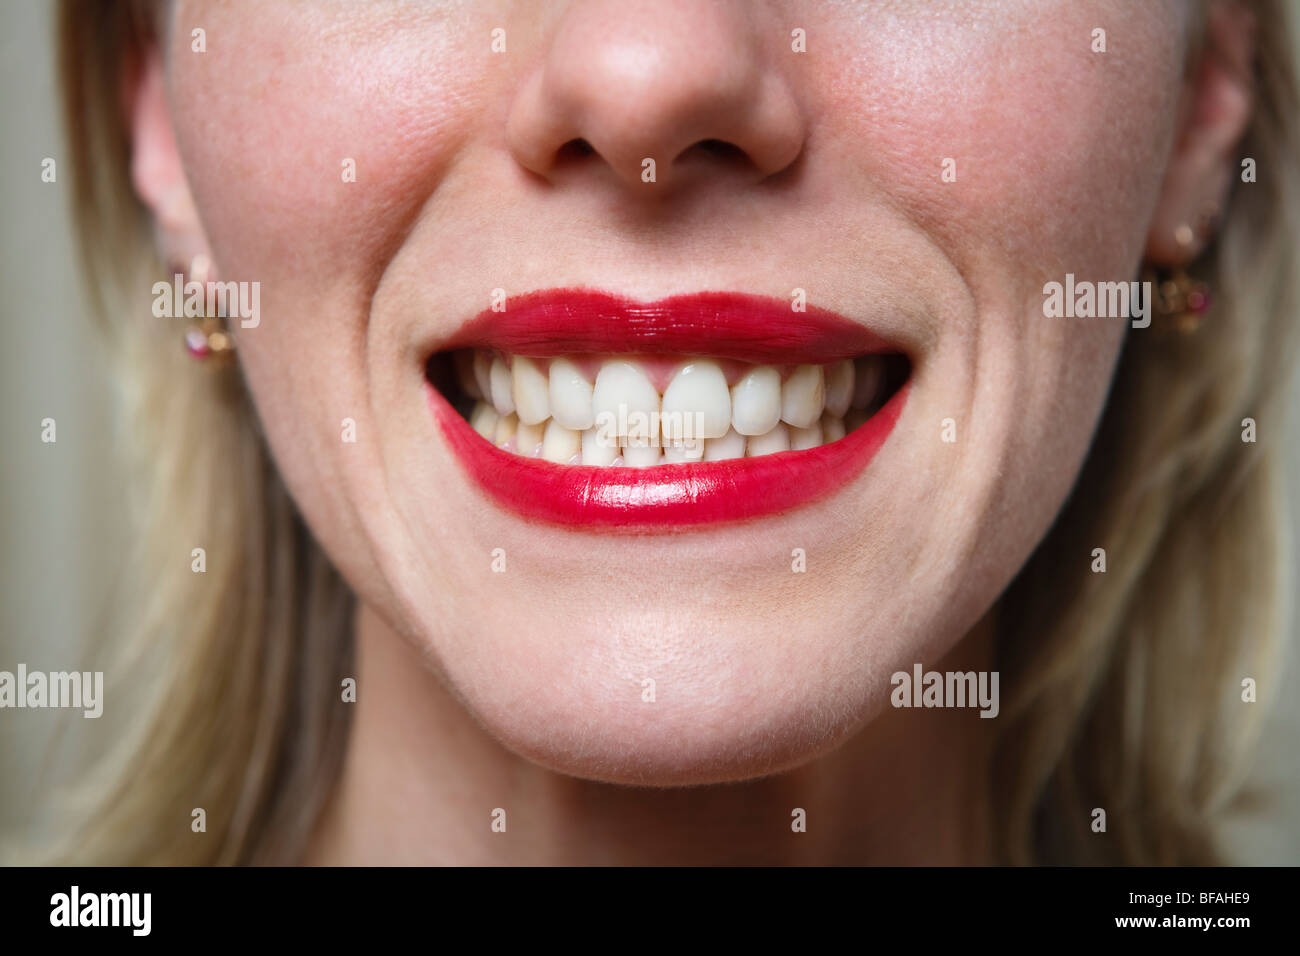 Woman smiling widely, probably insincerely Stock Photo